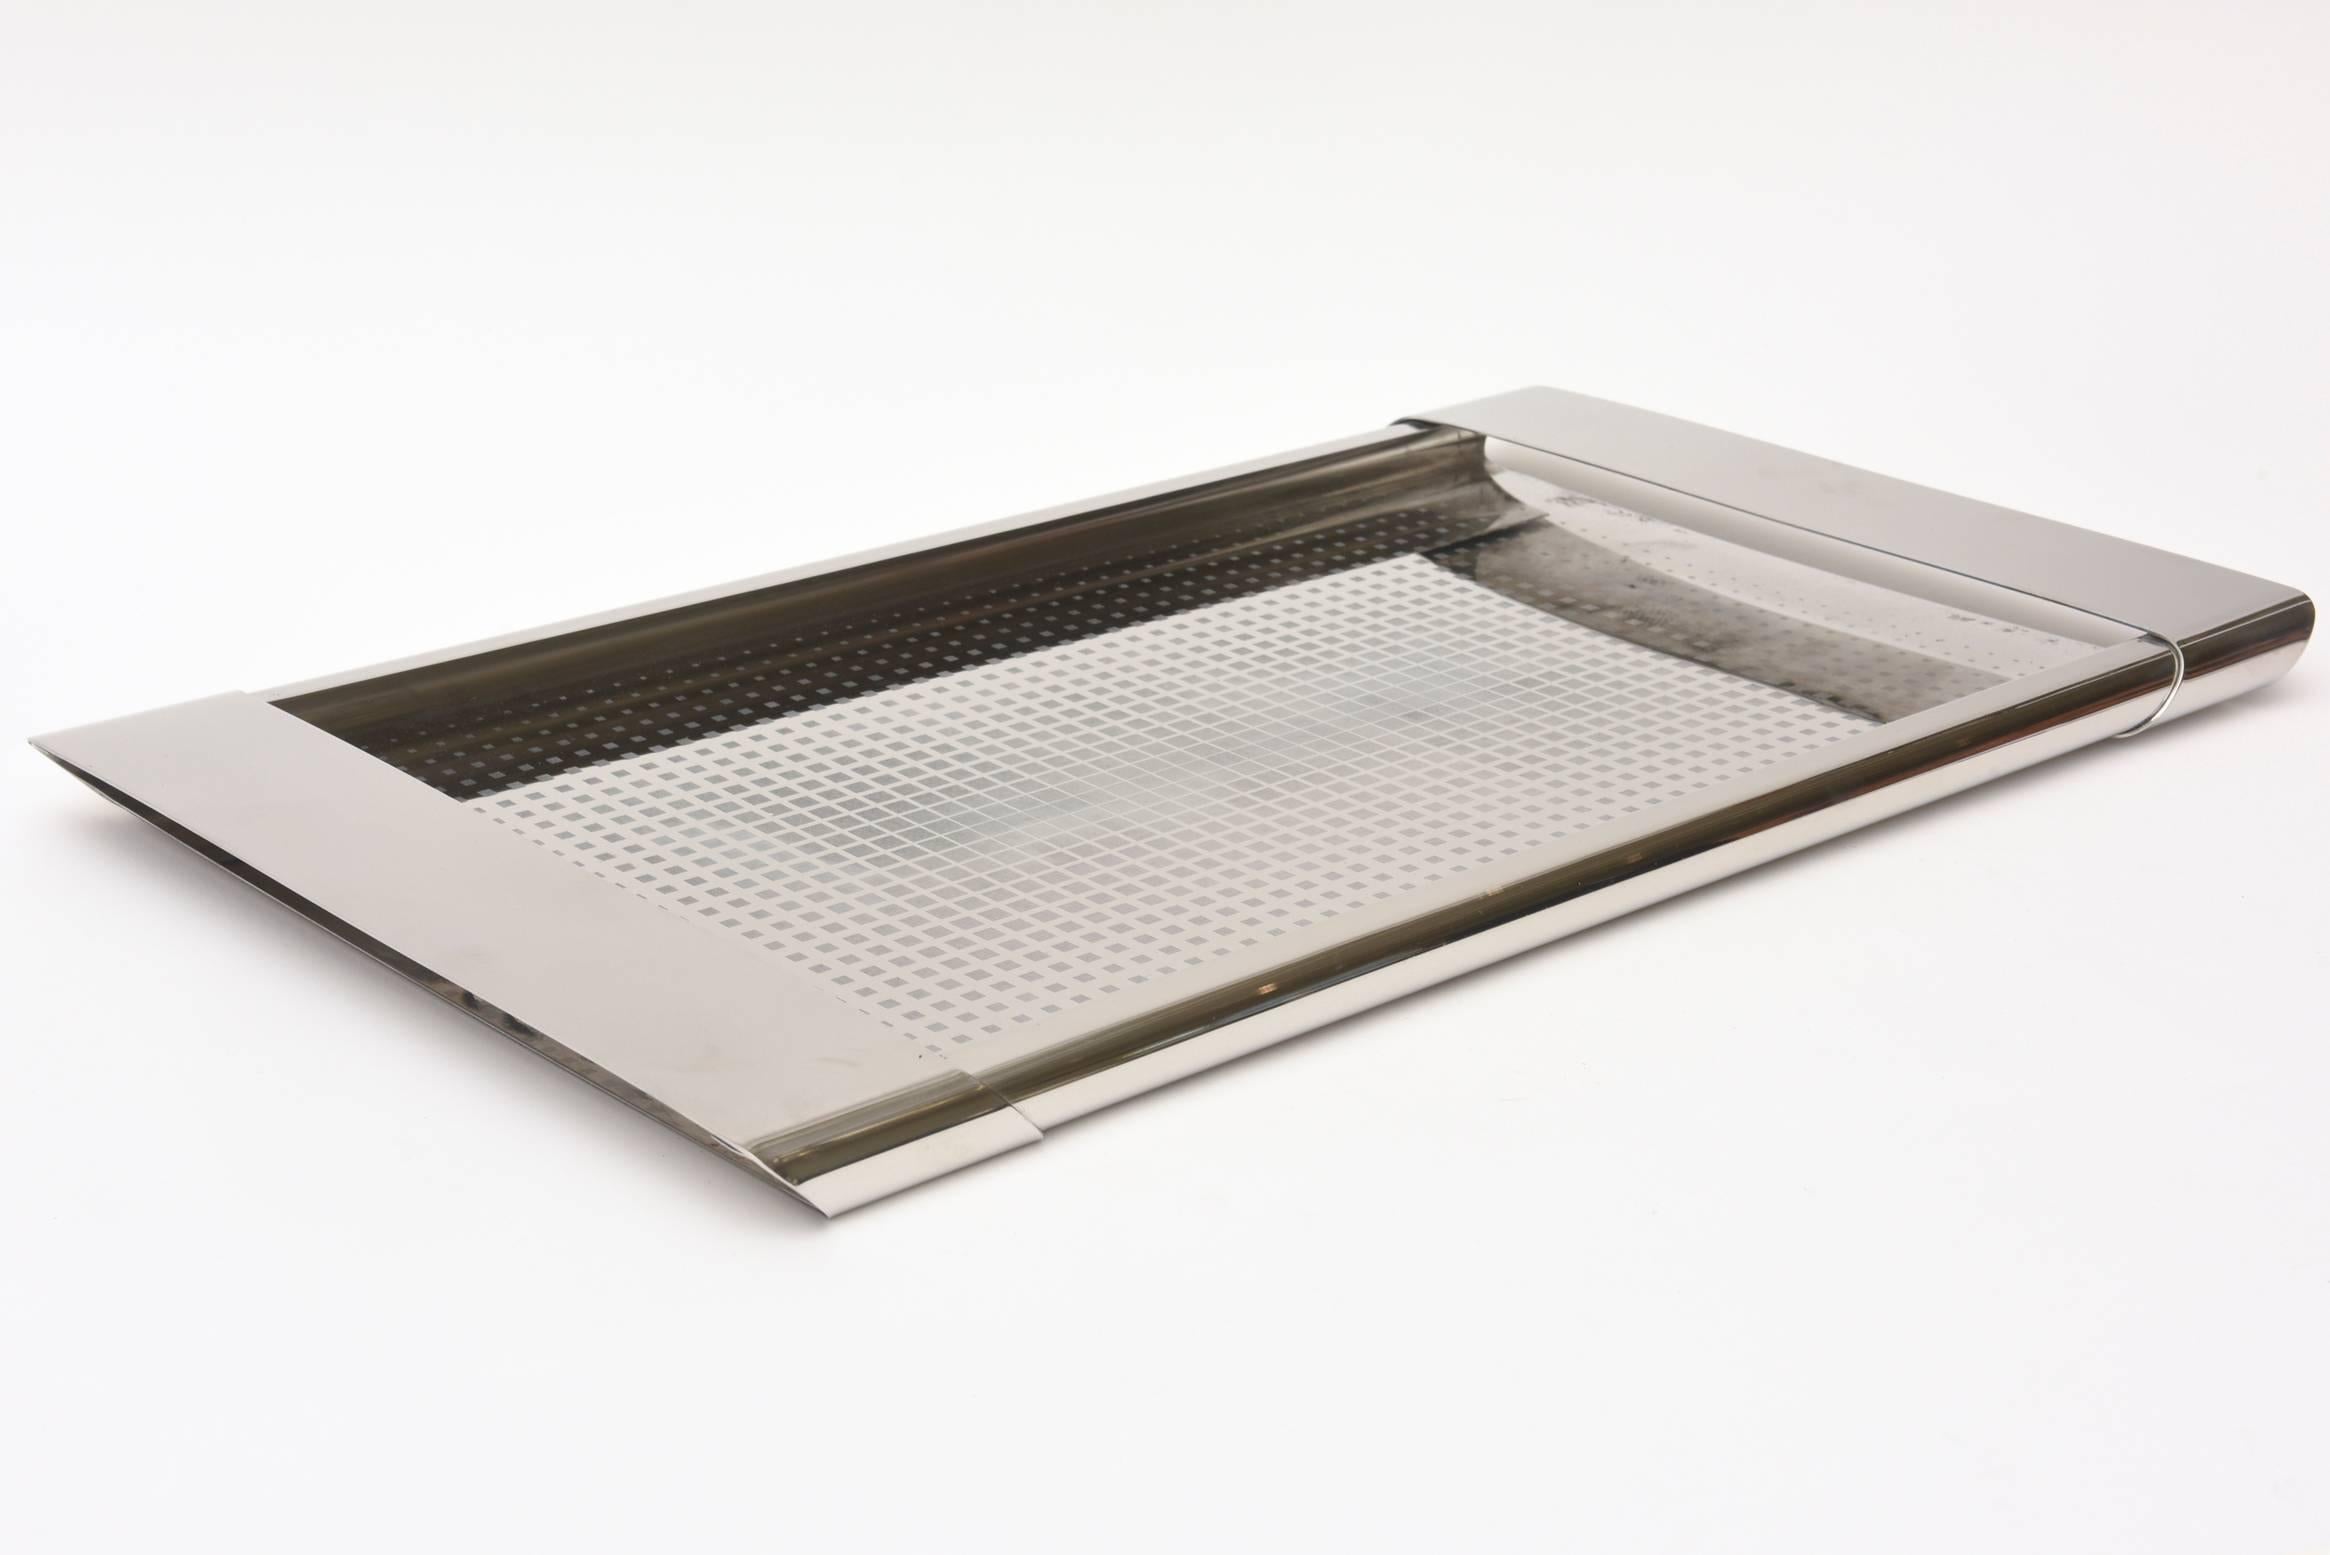 This wonderful long Italian Alessi rectangular tray has a graphic design of repeated graduated small squares in the center portion. It is stainless steel. It is called the Coppolla tray.
Signed Alessi Italia nox 18/10 Coppolla.
It is from the